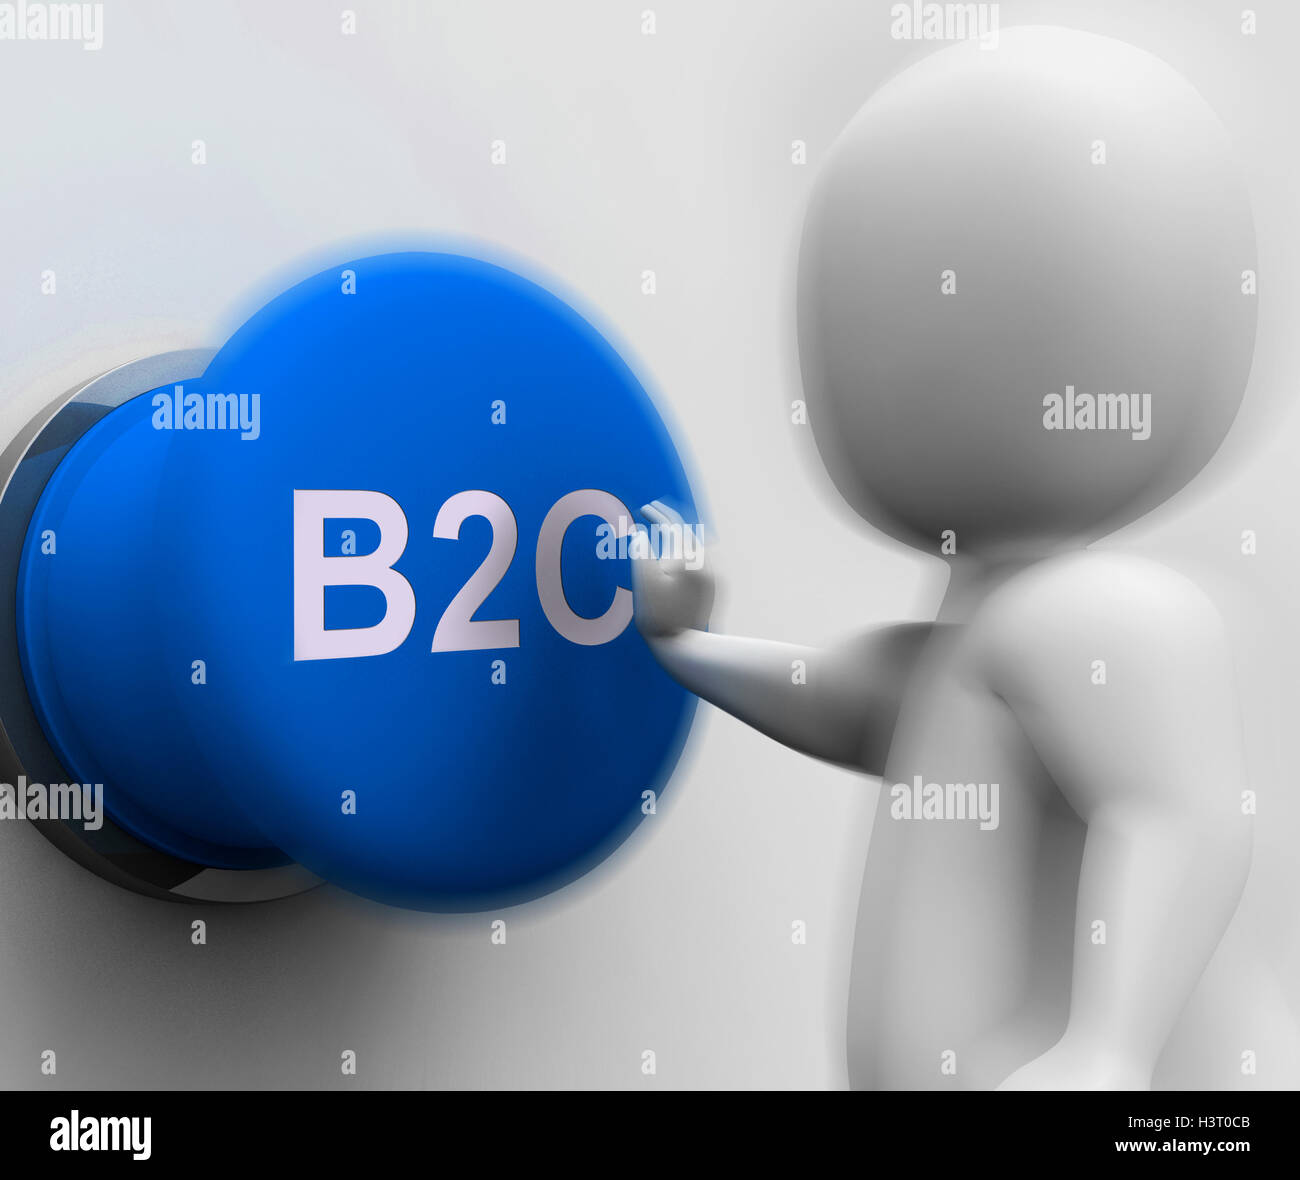 B2C Pressed Shows Business To Consumer And Selling Stock Photo